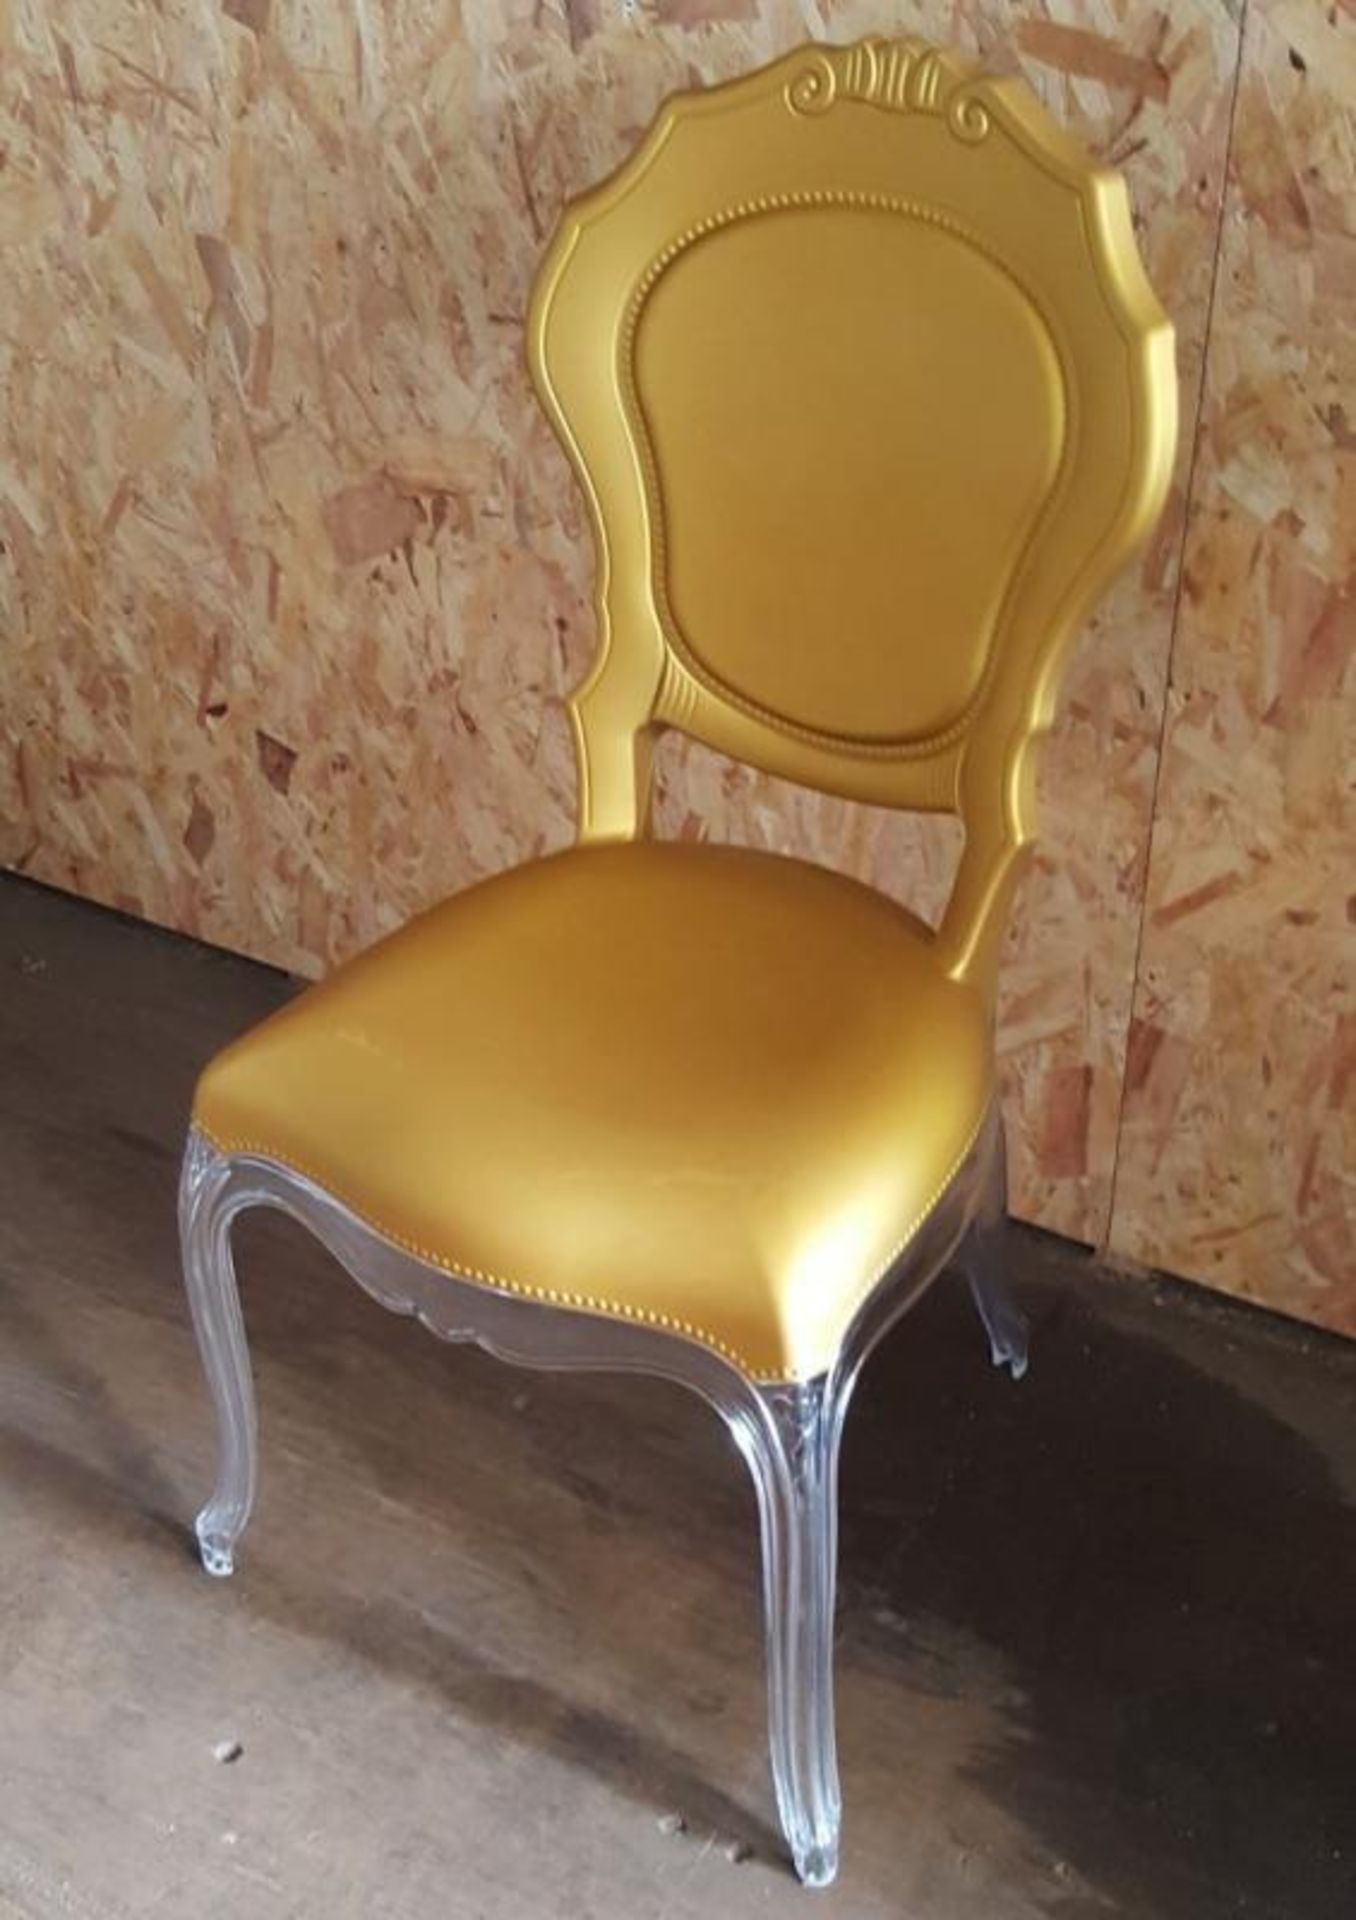 5 x Acrylic Baroque-style 'Belle Epoque' Chairs Featuring A Clear Polycarbonate Frame With An Attrac - Image 5 of 5